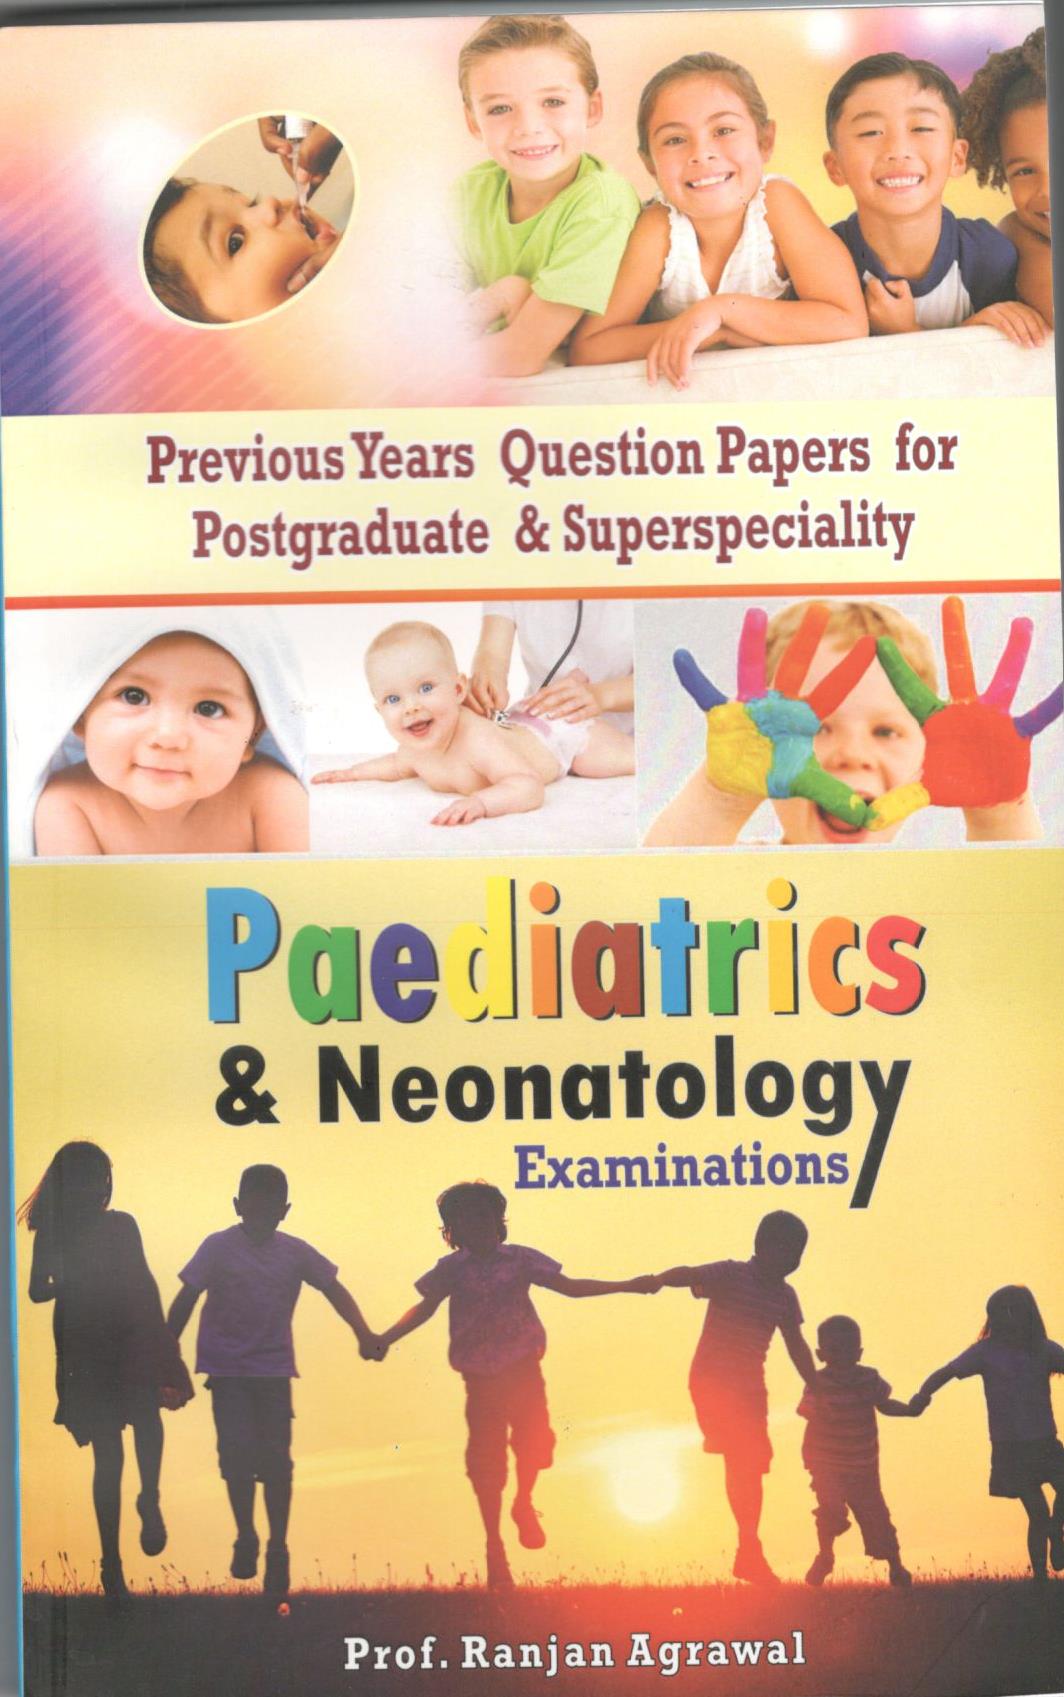 Previous Years Question Papers For Postgraduate & Superspeciality Paediatrics & Neonatology Examinat